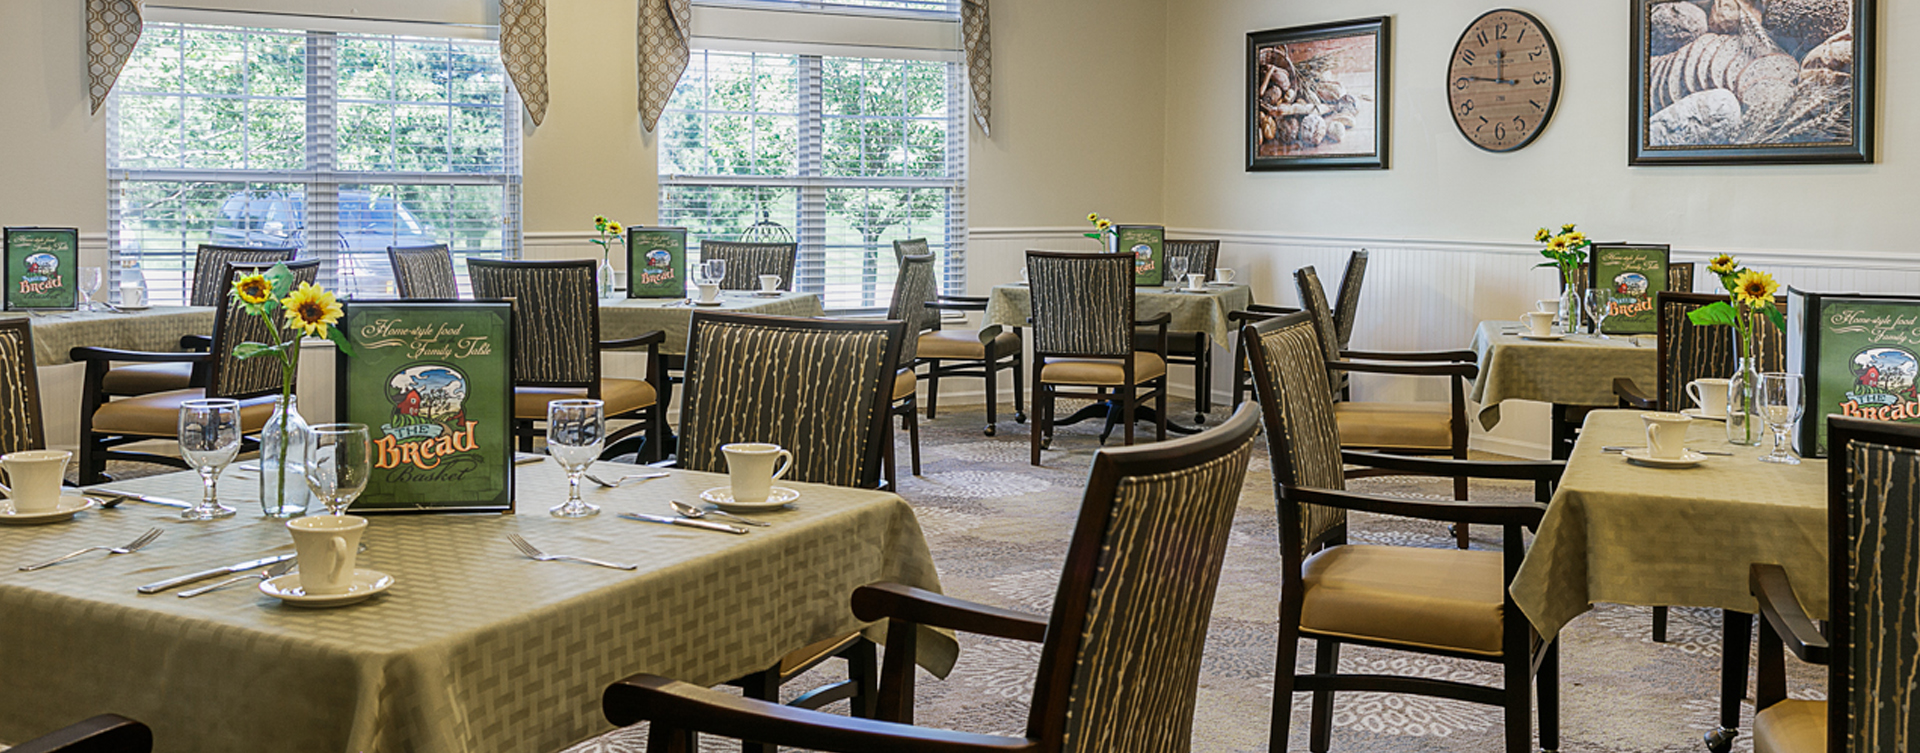 Enjoy homestyle food with made-from-scratch recipes in our dining room at Bickford of Marshalltown